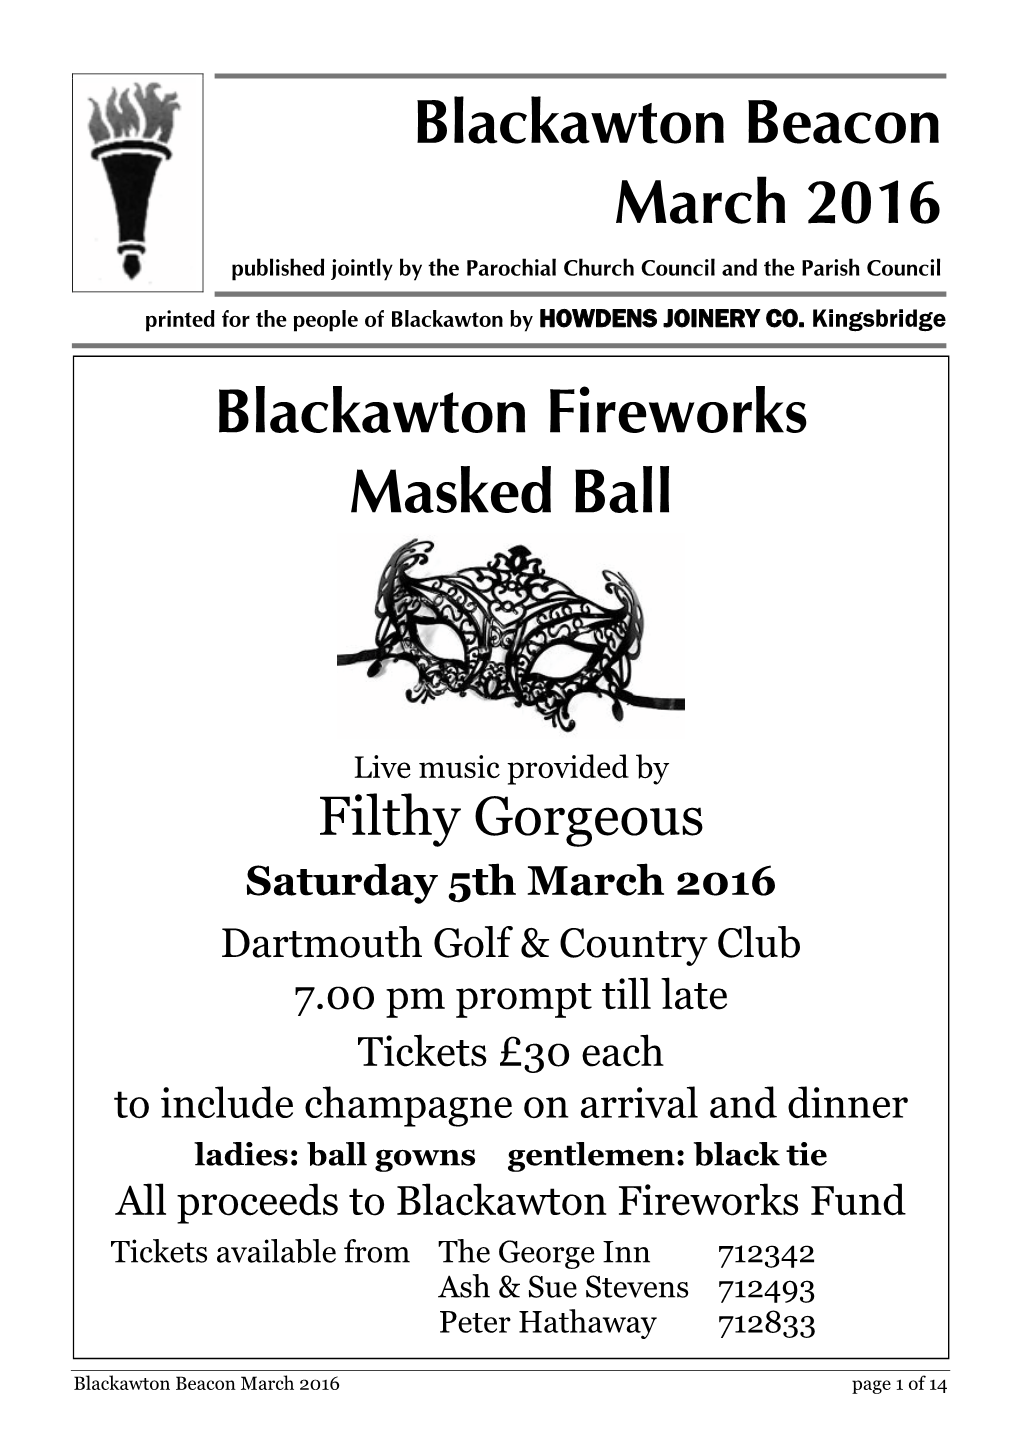 Blackawton Beacon March 2016 Published Jointly by the Parochial Church Council and the Parish Council